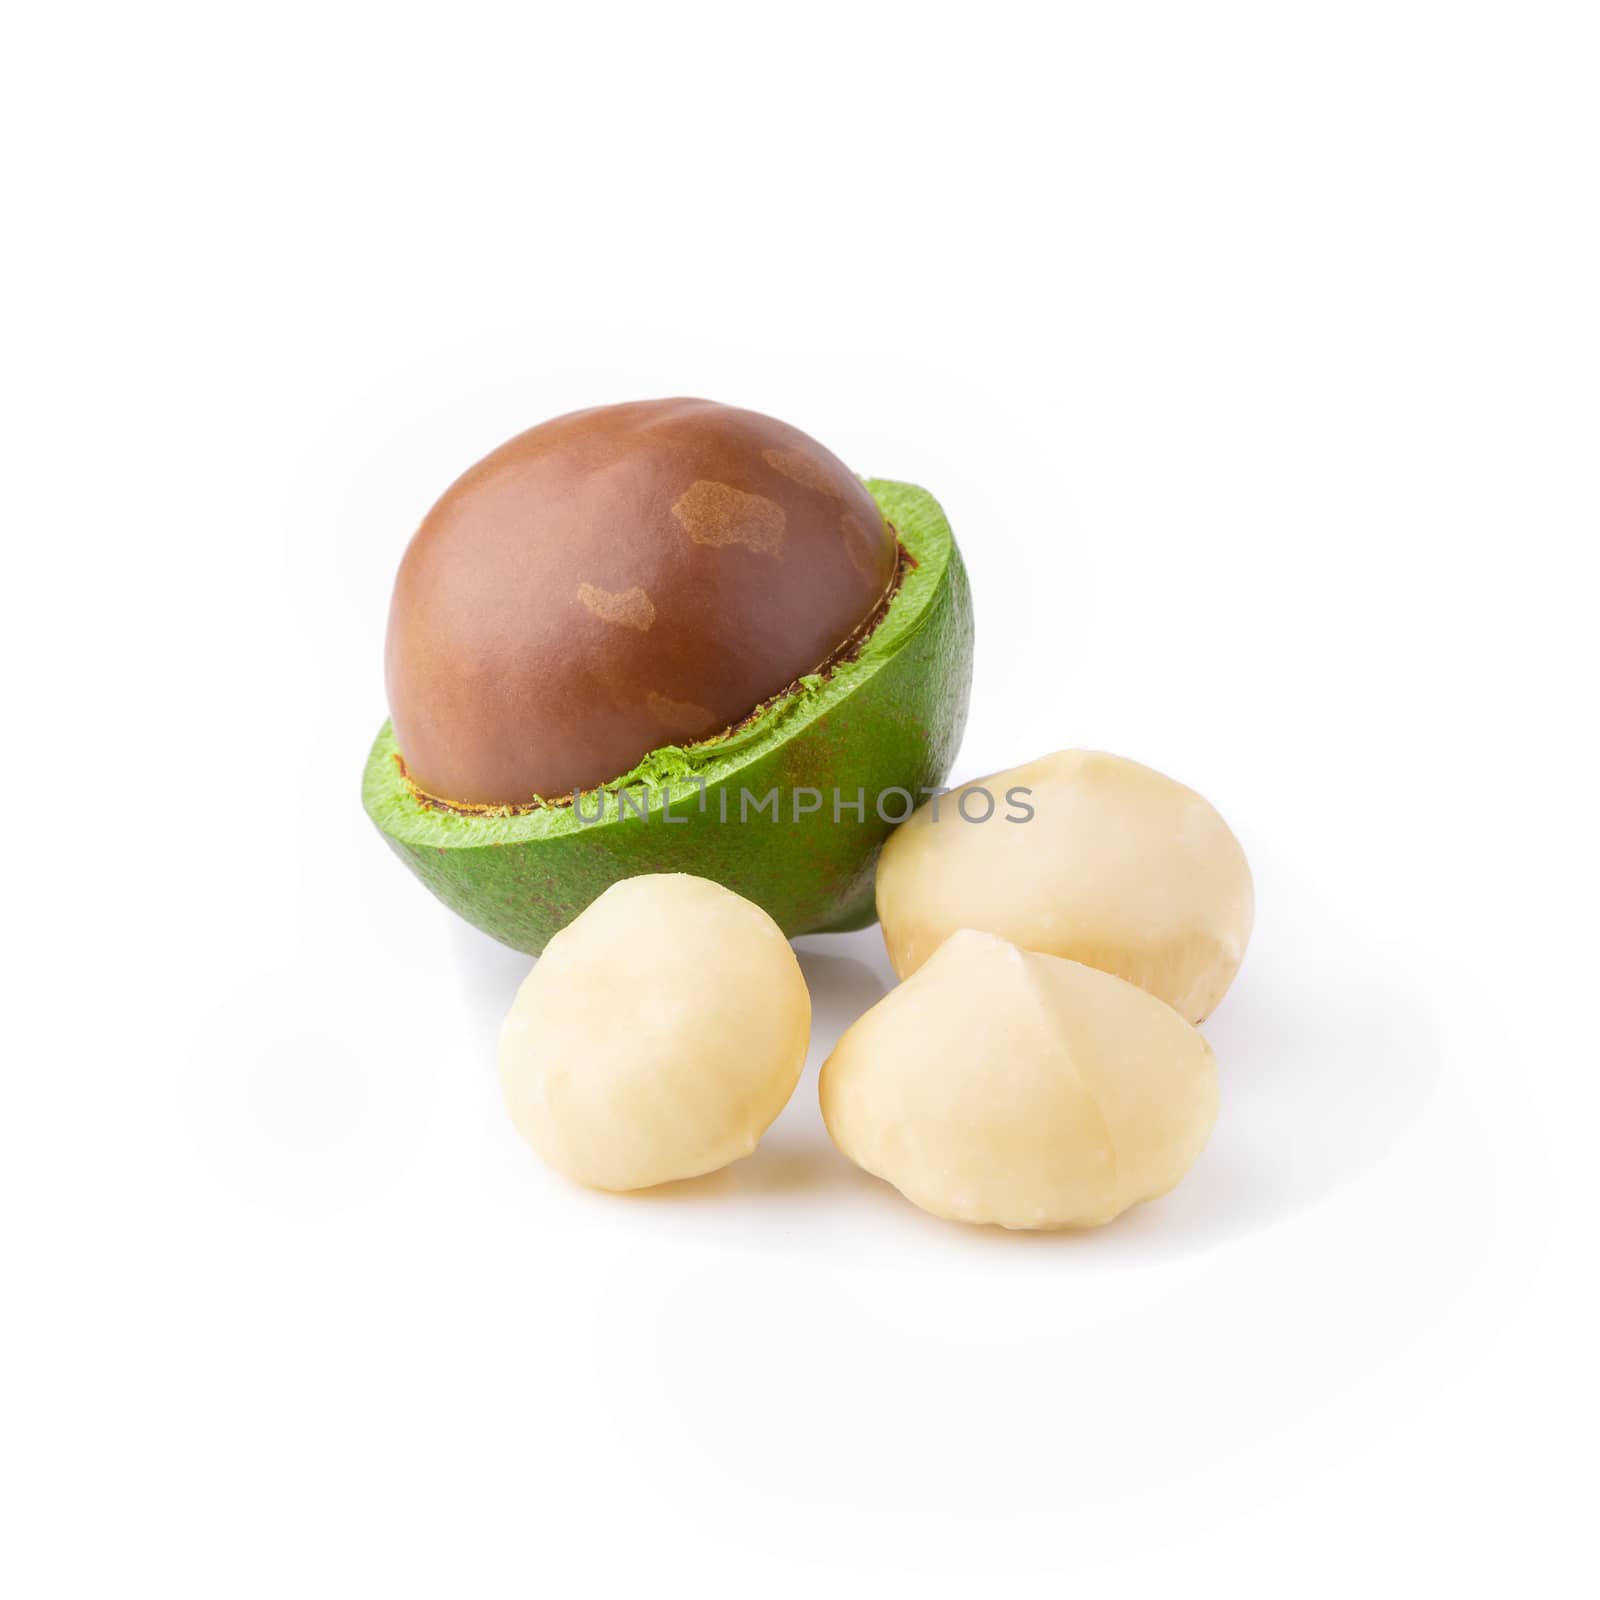 Macadamia nuts isolated on a white background.